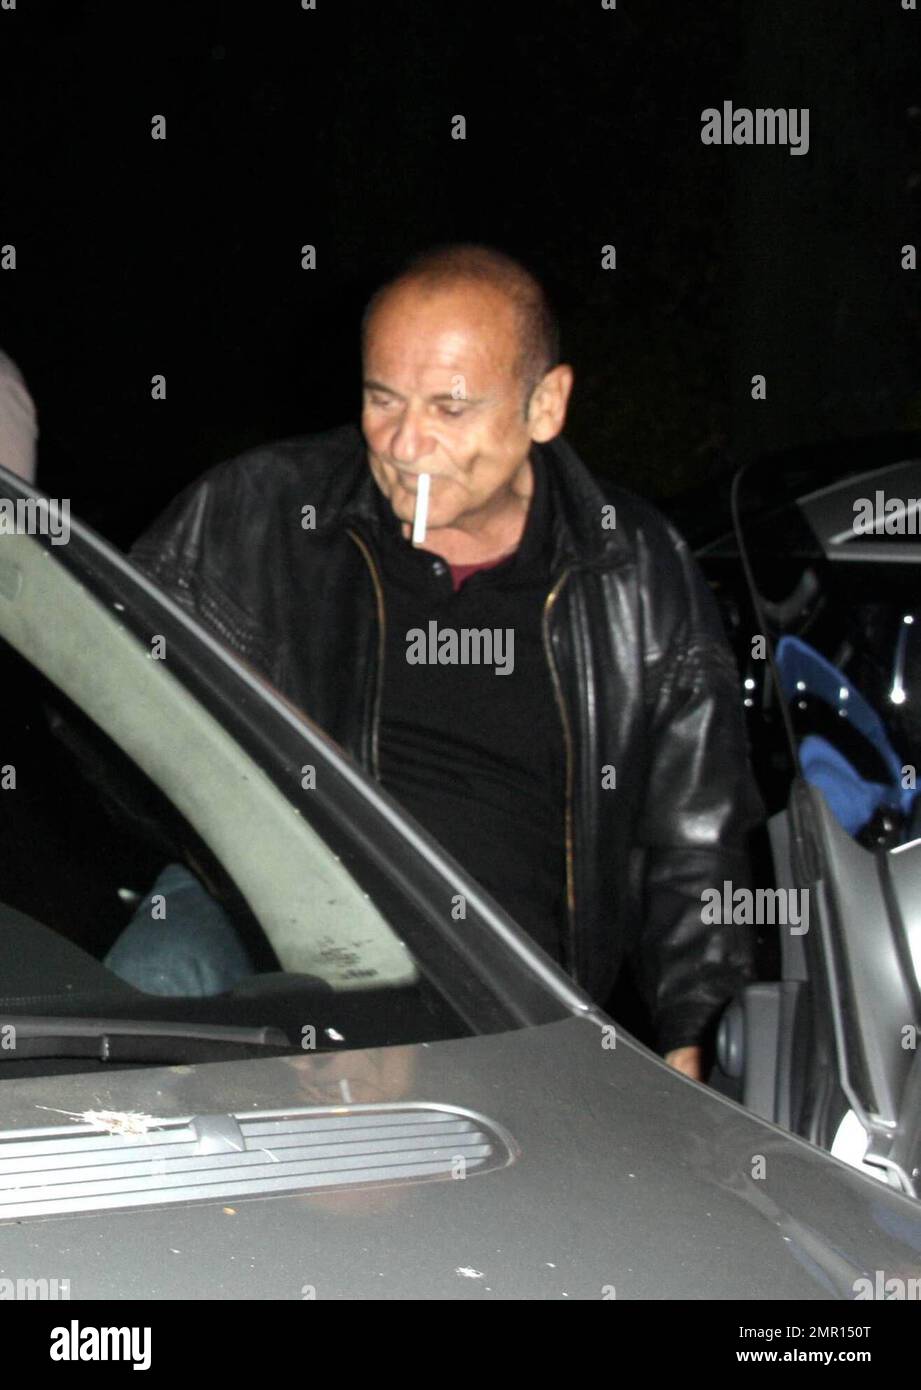 Exclusive!! Joe Pesci and Angie Everhart leave the restaurant AGO. Everhart makes her way quickly to the waiting car, hiding her face as much as possible, but Pesci smokes a cigarette while signing autographs and taking photos with fans. Los Angeles, CA. 10/21/08. Stock Photo